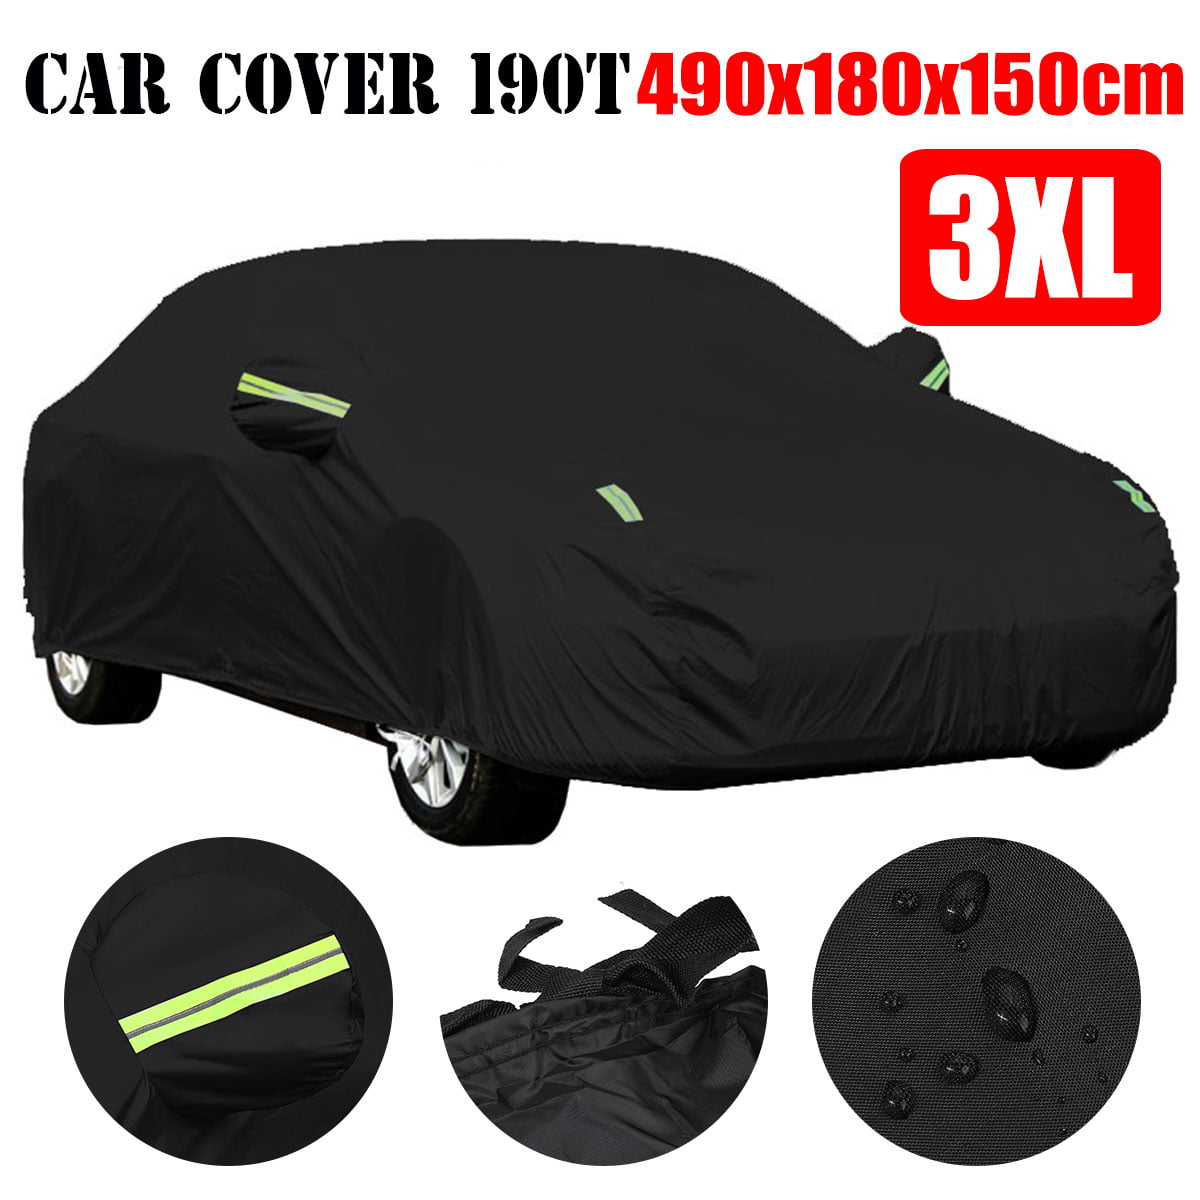 Heavy Duty Car Cover Waterproof All Weather ,Universal Outdoor Full Car